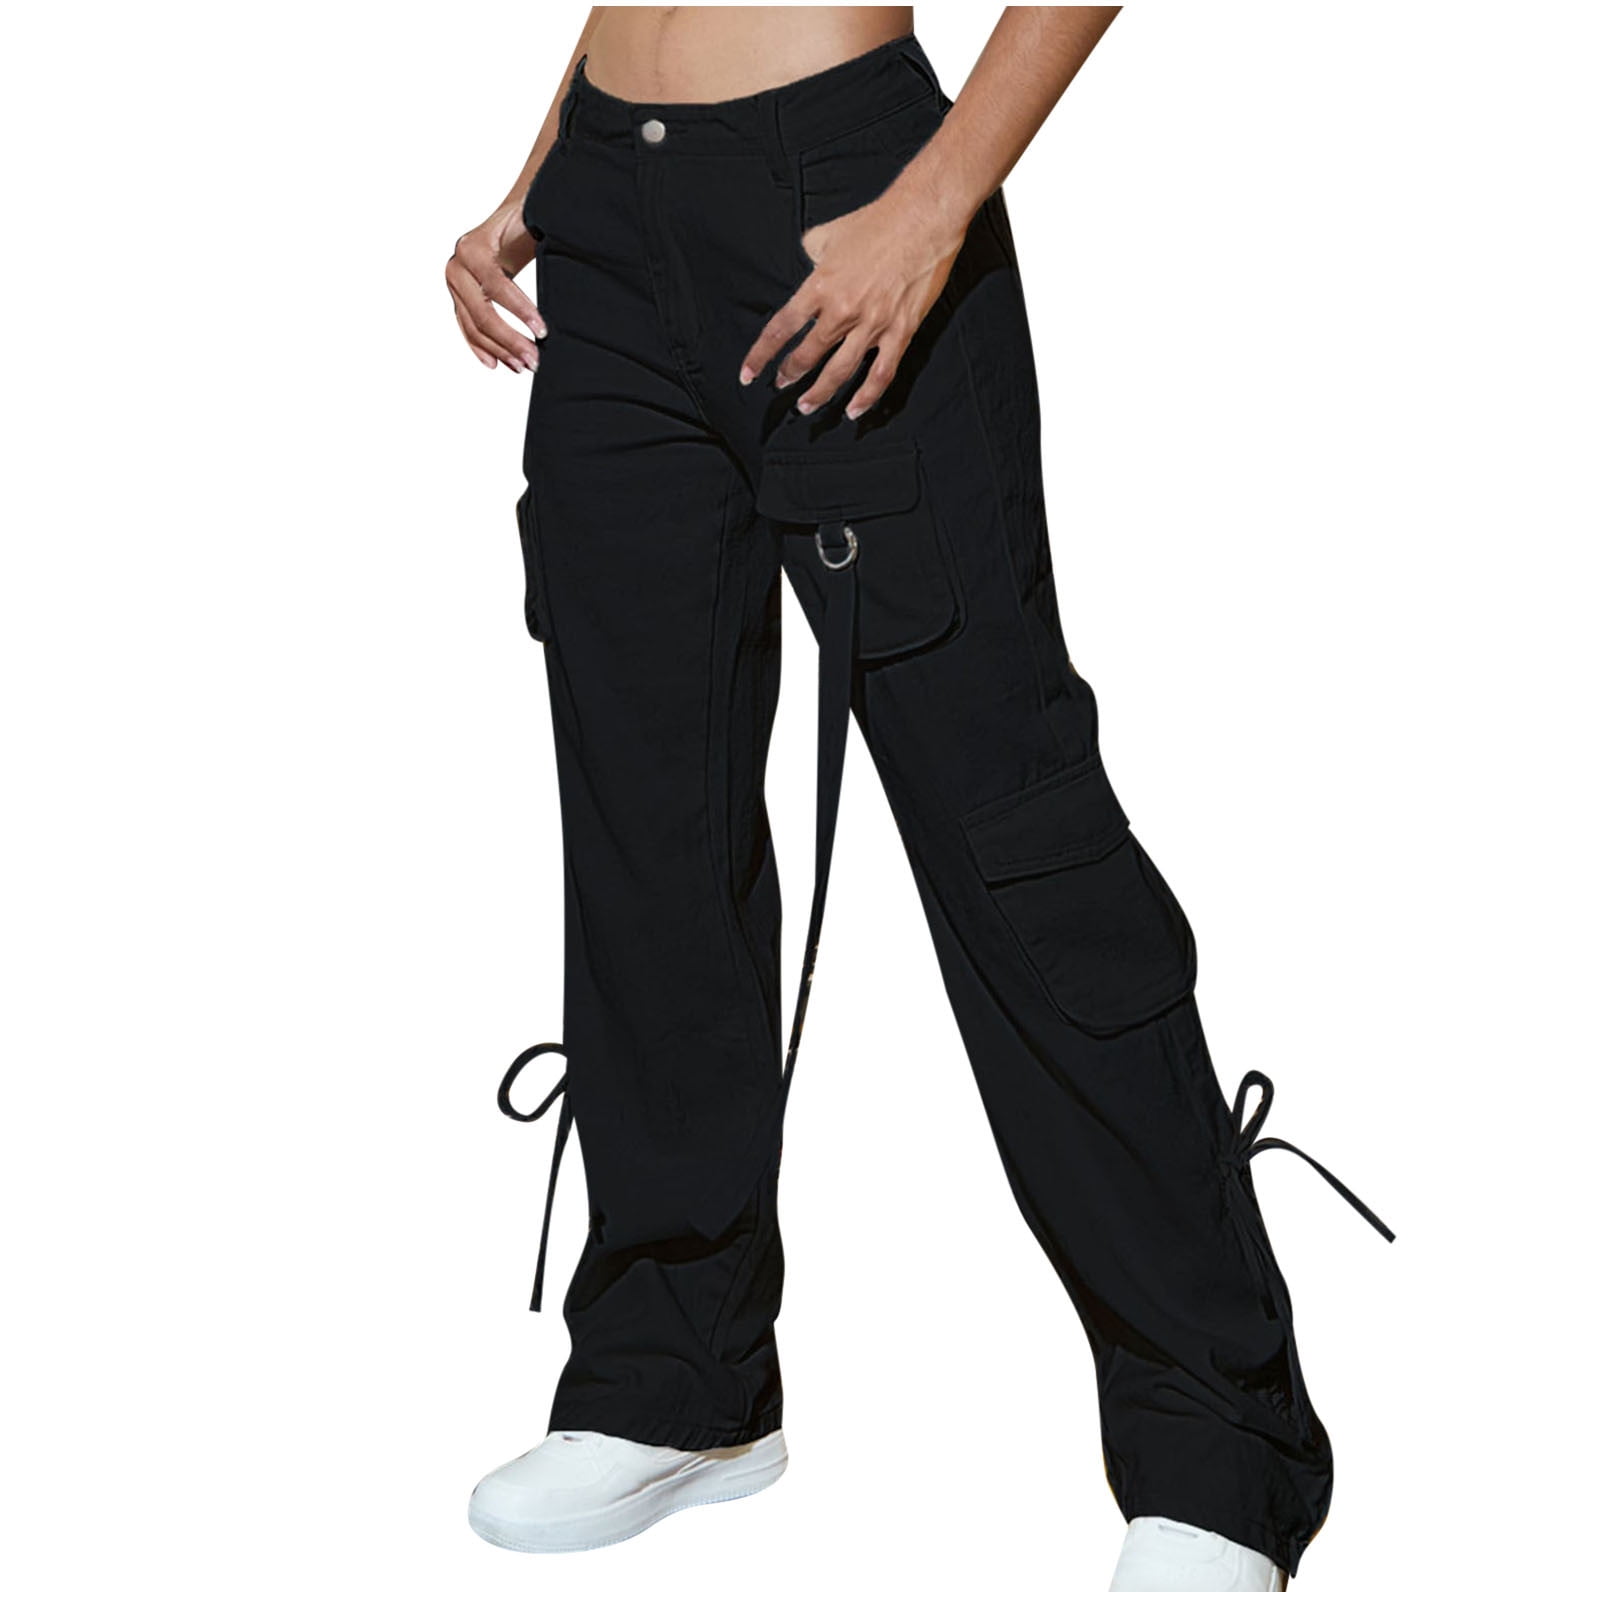  Sweatpants for Teen Girls High Waisted Baggy Cinch Bottom  Sweatpants Yoga Workout Athletic Jogger Lounge Bottoms Trousers(Black,Small)  : Clothing, Shoes & Jewelry